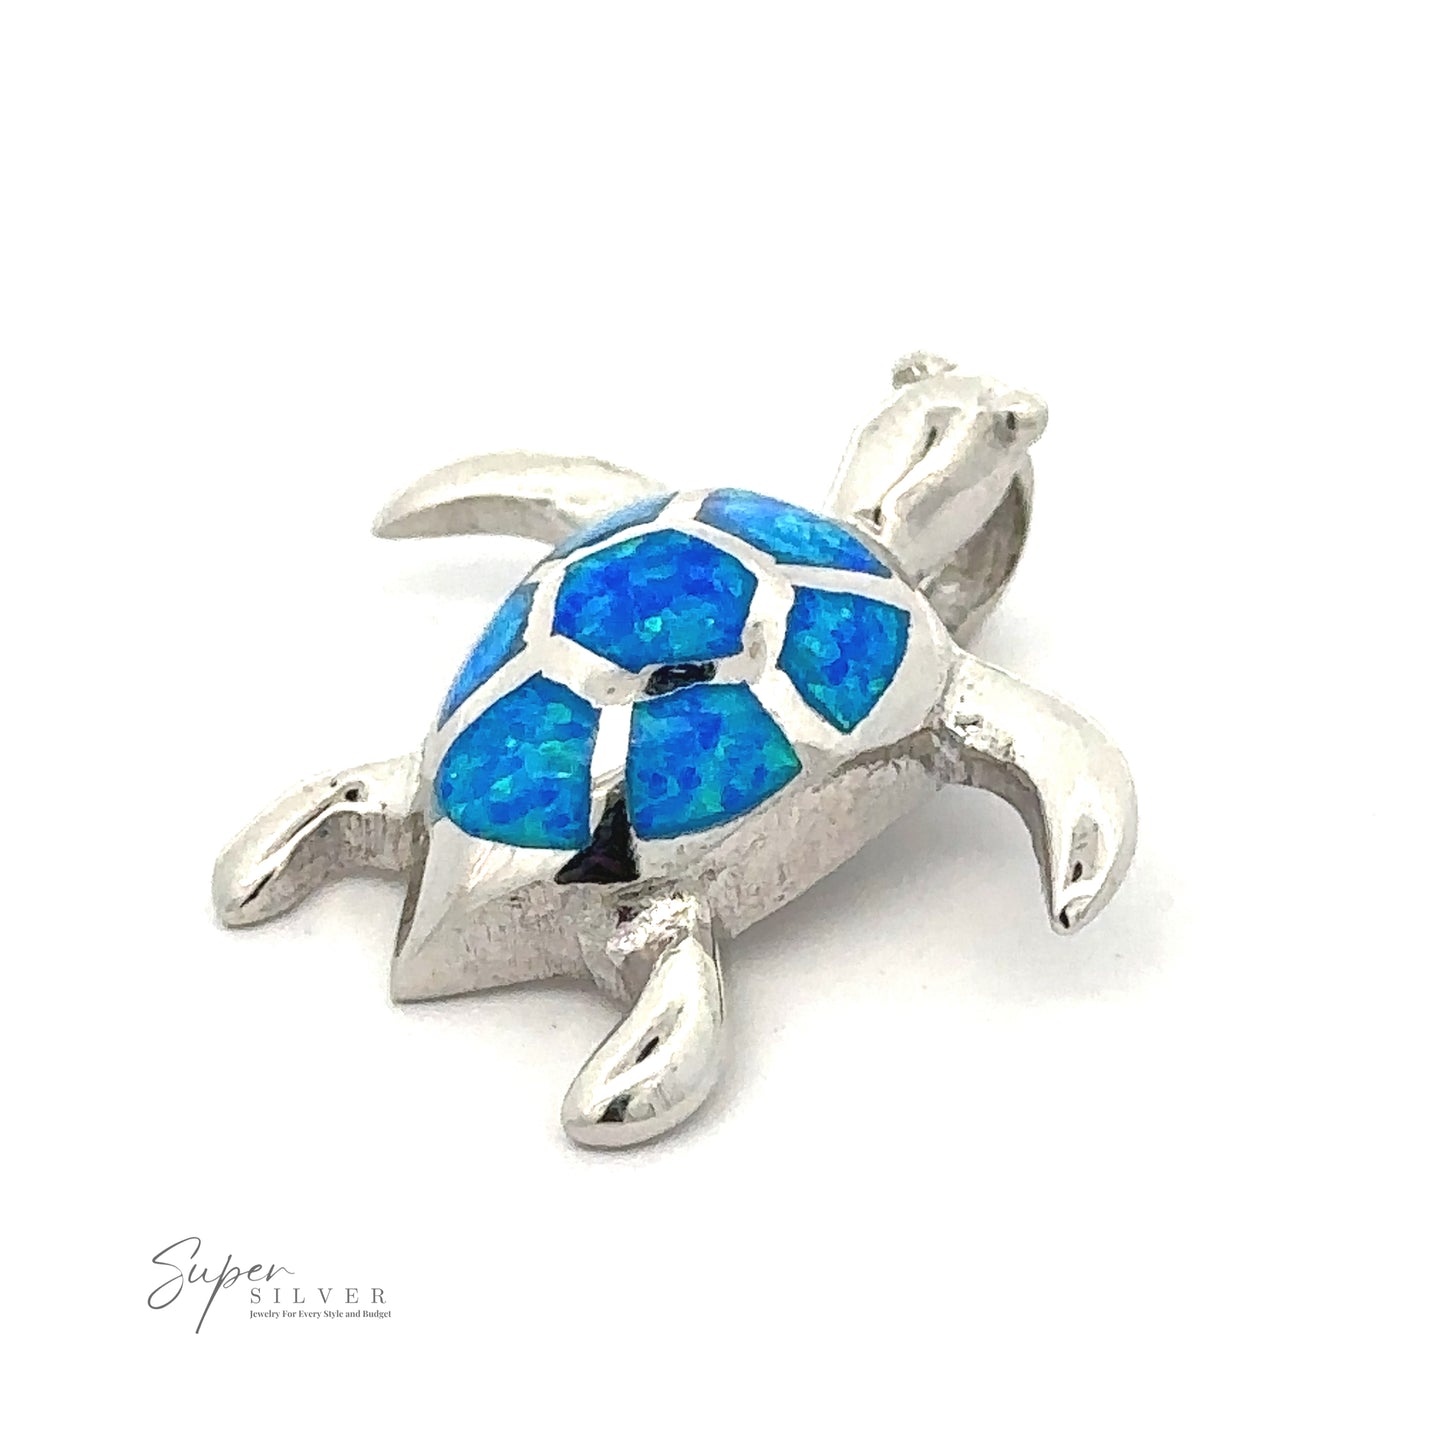 A Sterling Silver sea turtle pendant with a blue mosaic-patterned shell. The pendant is labeled "Opal Sea Turtle Pendant" in the bottom left corner.